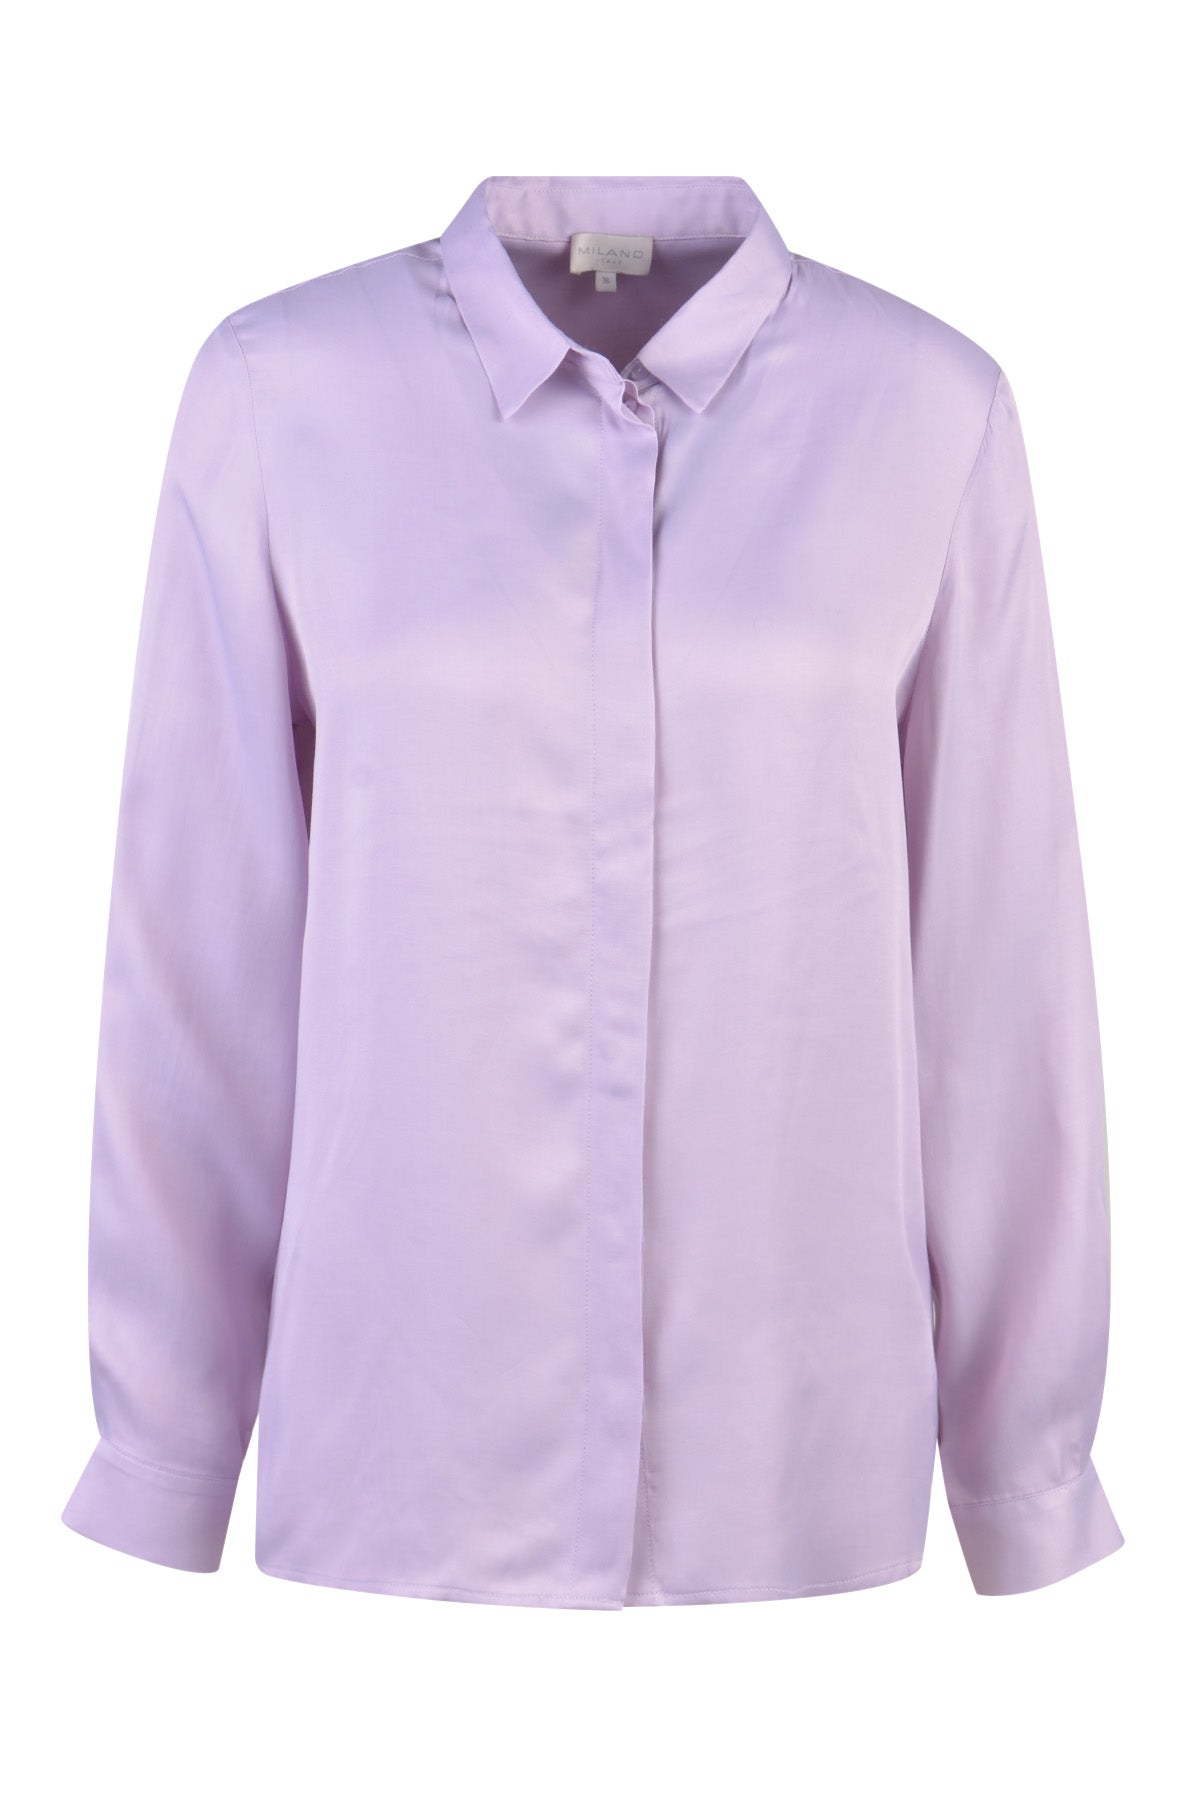 Blouse with collar, placket and cuff